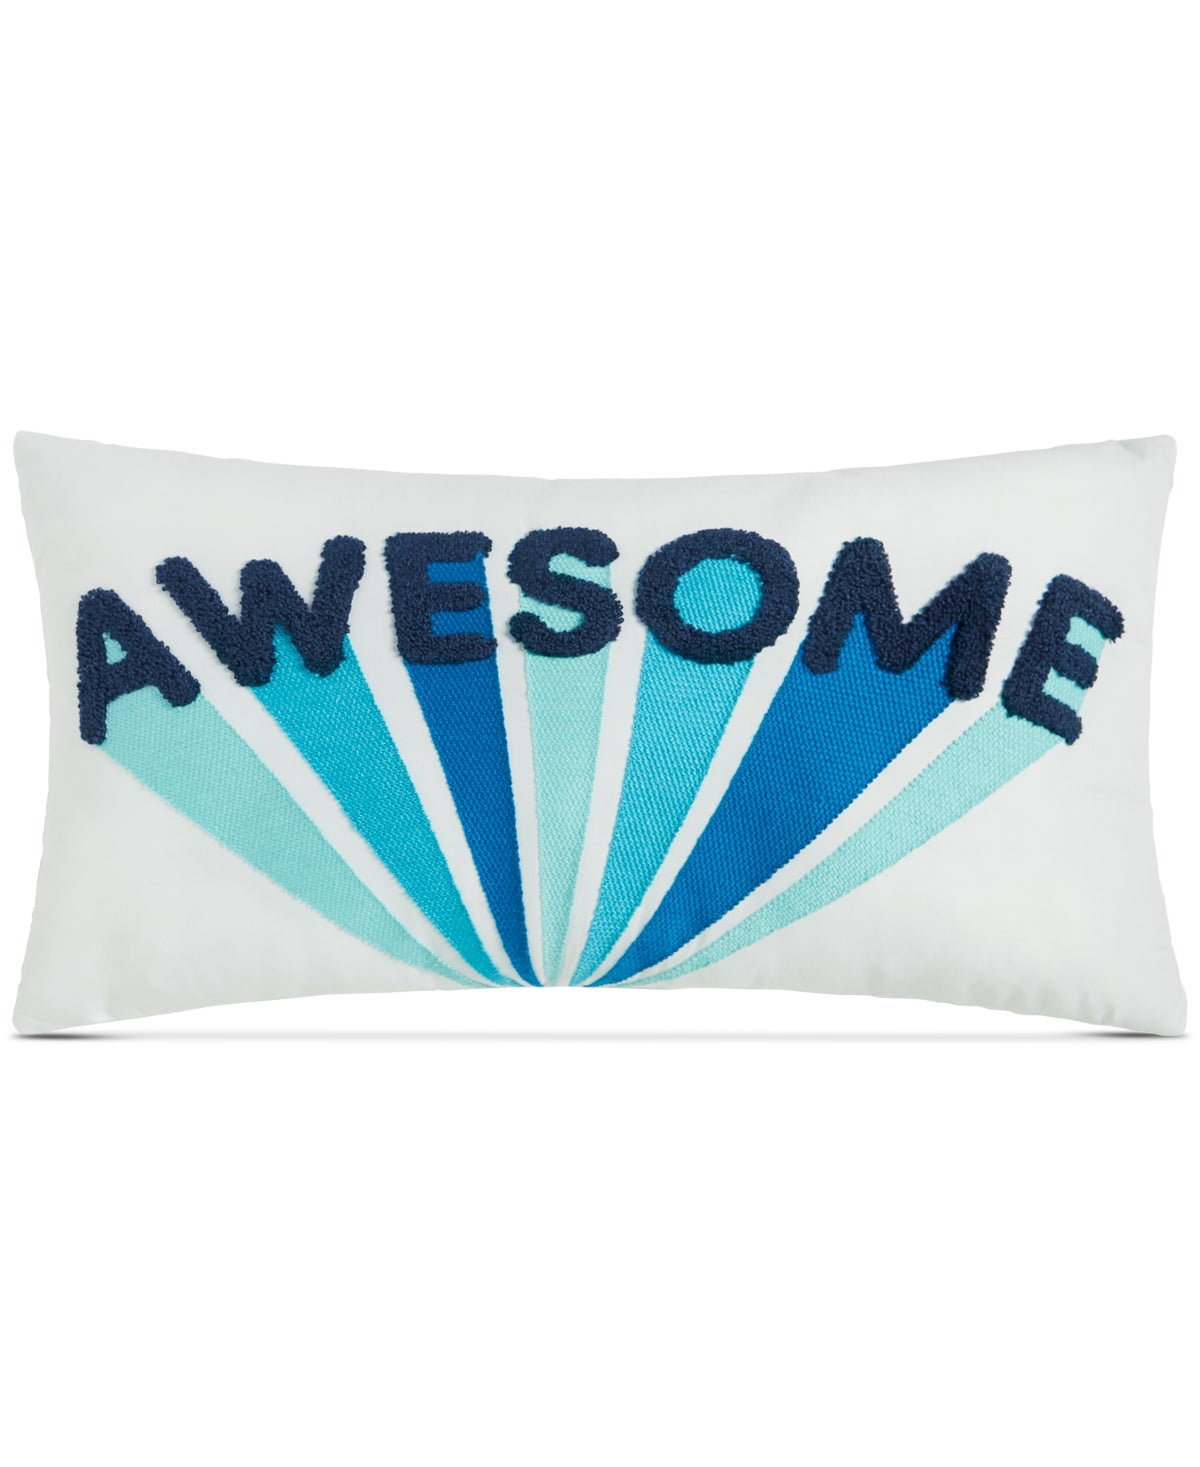 Charter Club Kids You're Awesome Decorative Pillow, 12" x 22", Created for Macy's Bedding